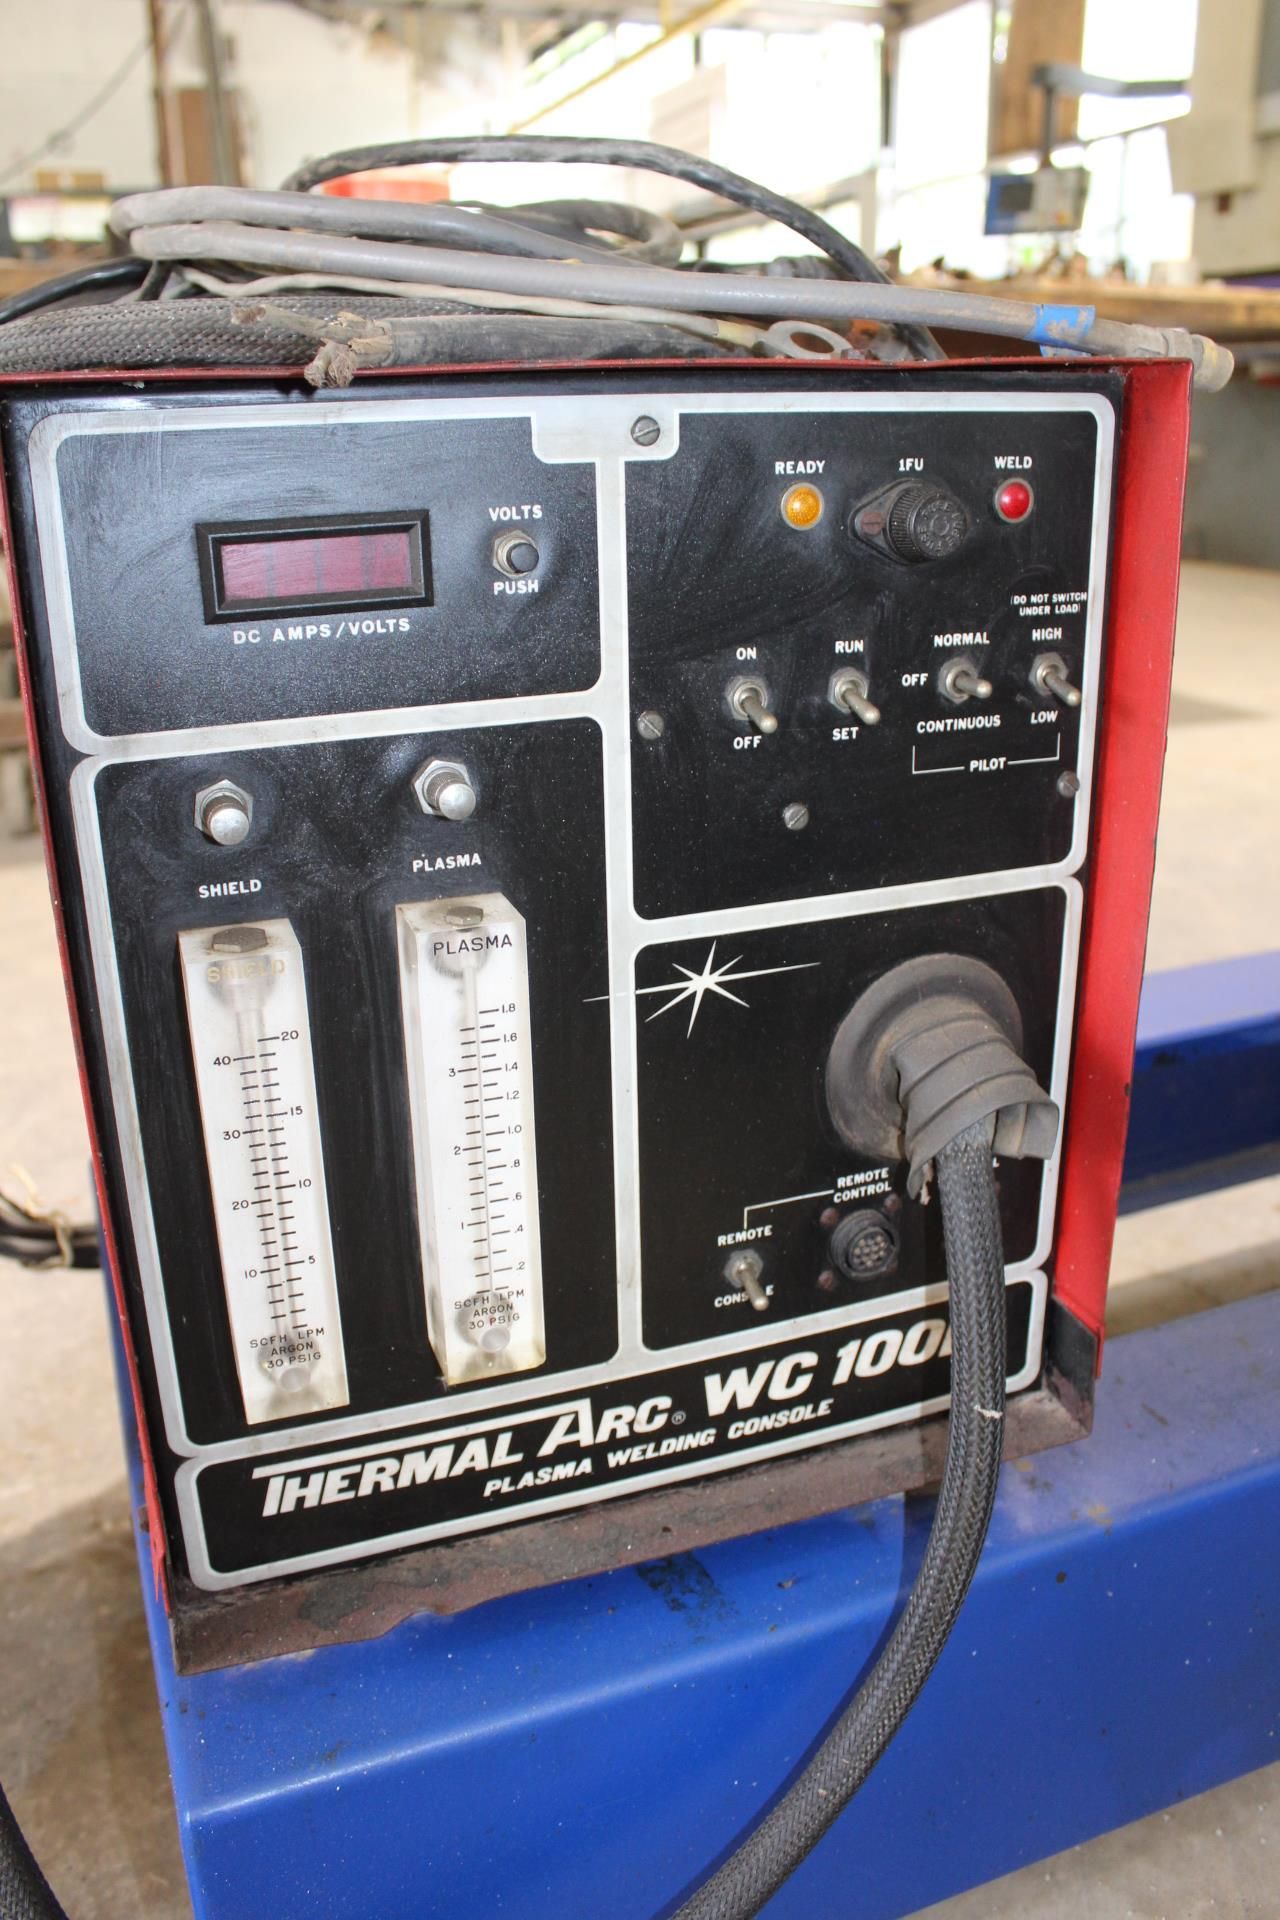 Thermal Dynamics Thermal Arc WC 100B Plasma Welder Console, with 4' External Seam Welder Chassis - Image 2 of 5